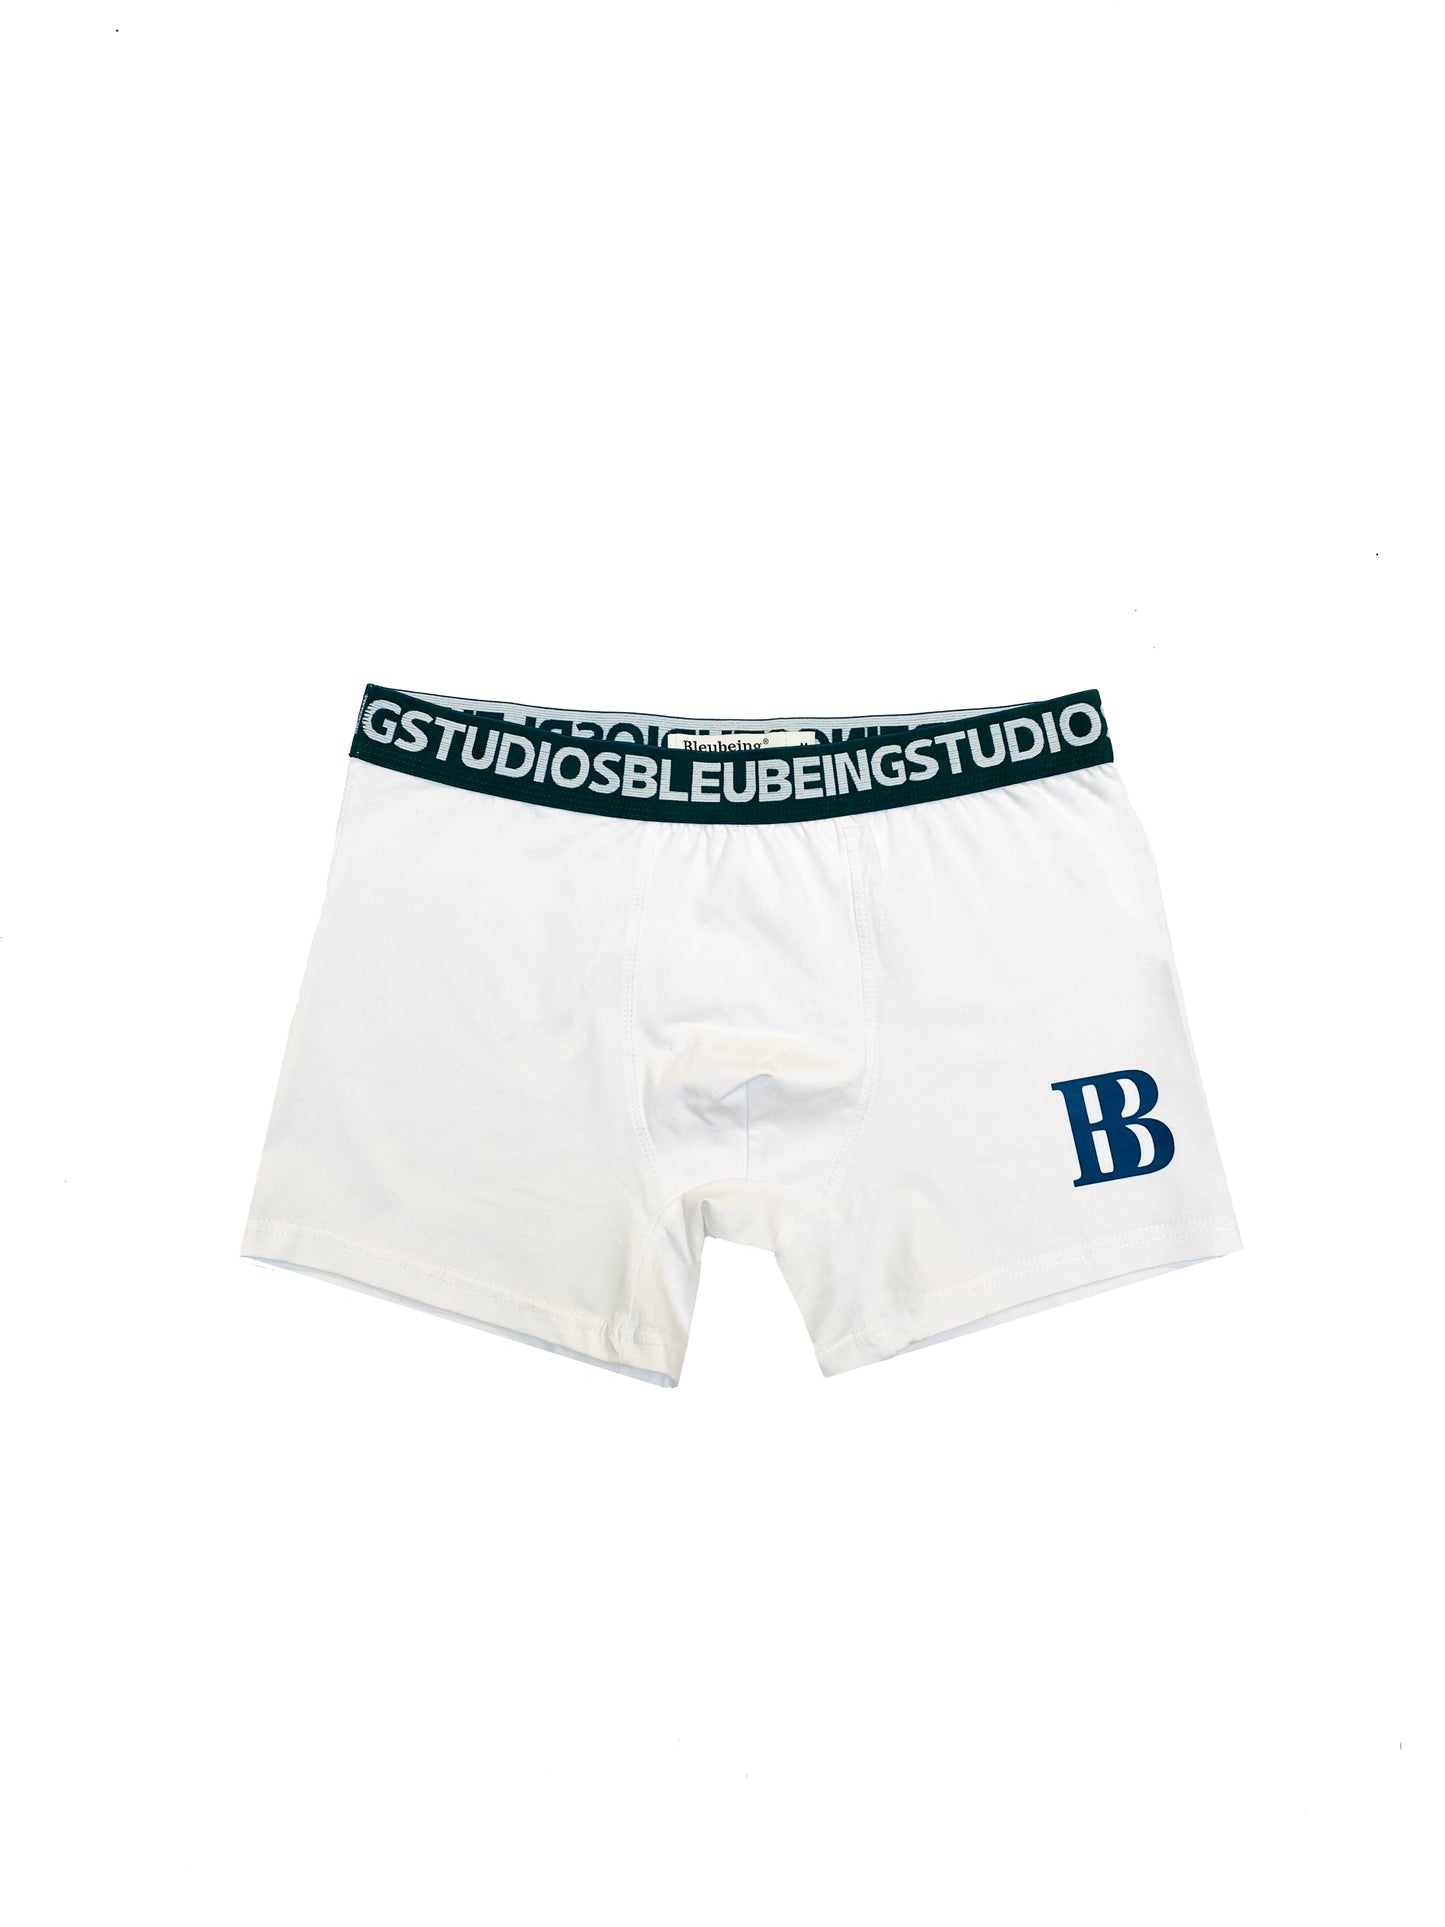 BB Boxer Brief 3 pack